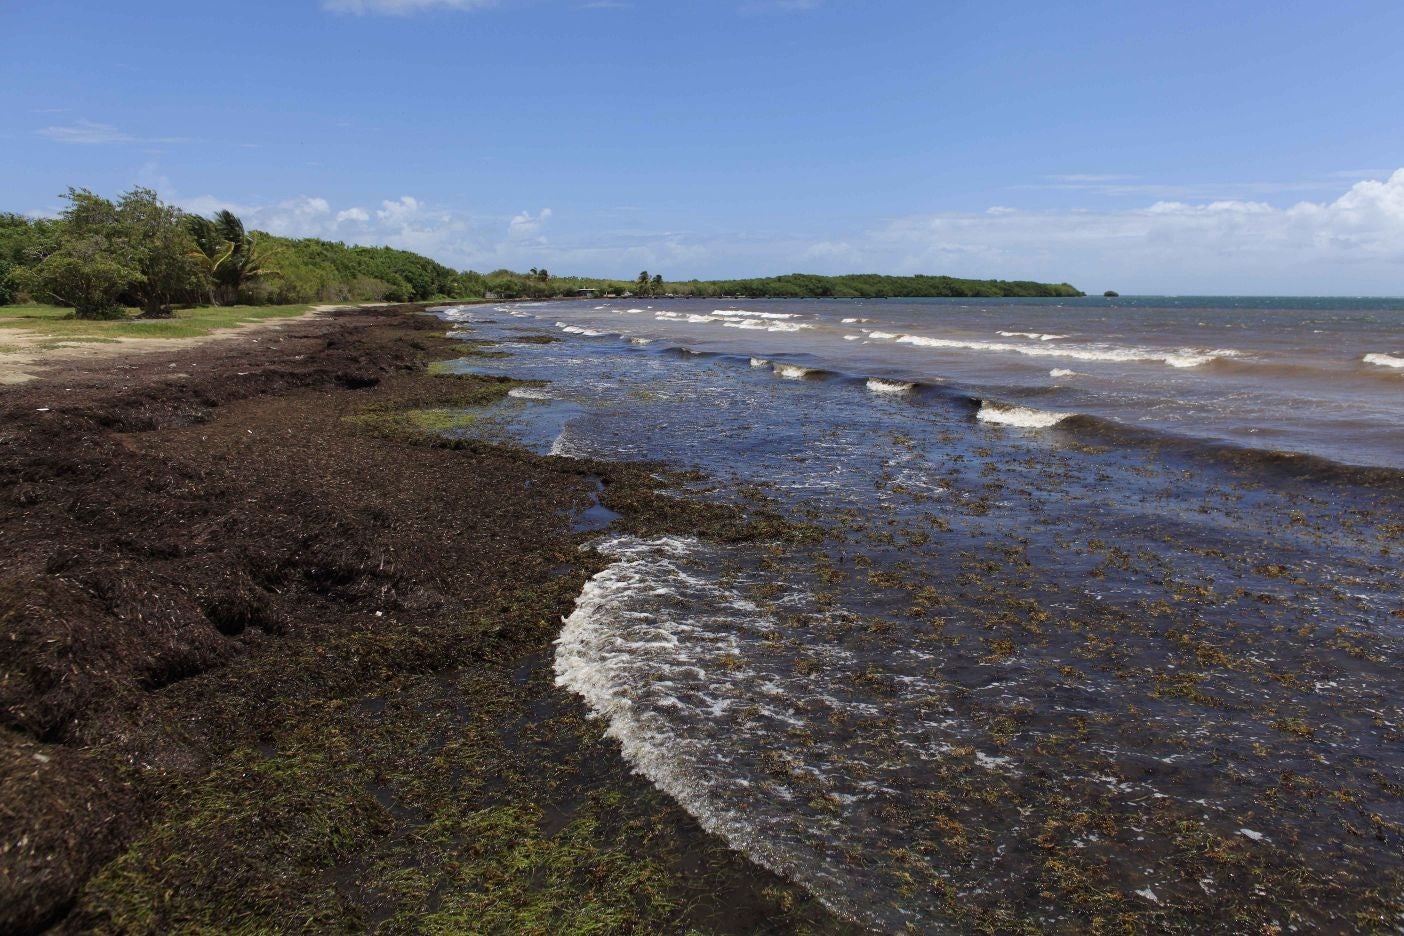 Authorities are trying to solve the seaweed problem before the tourist season begins in December